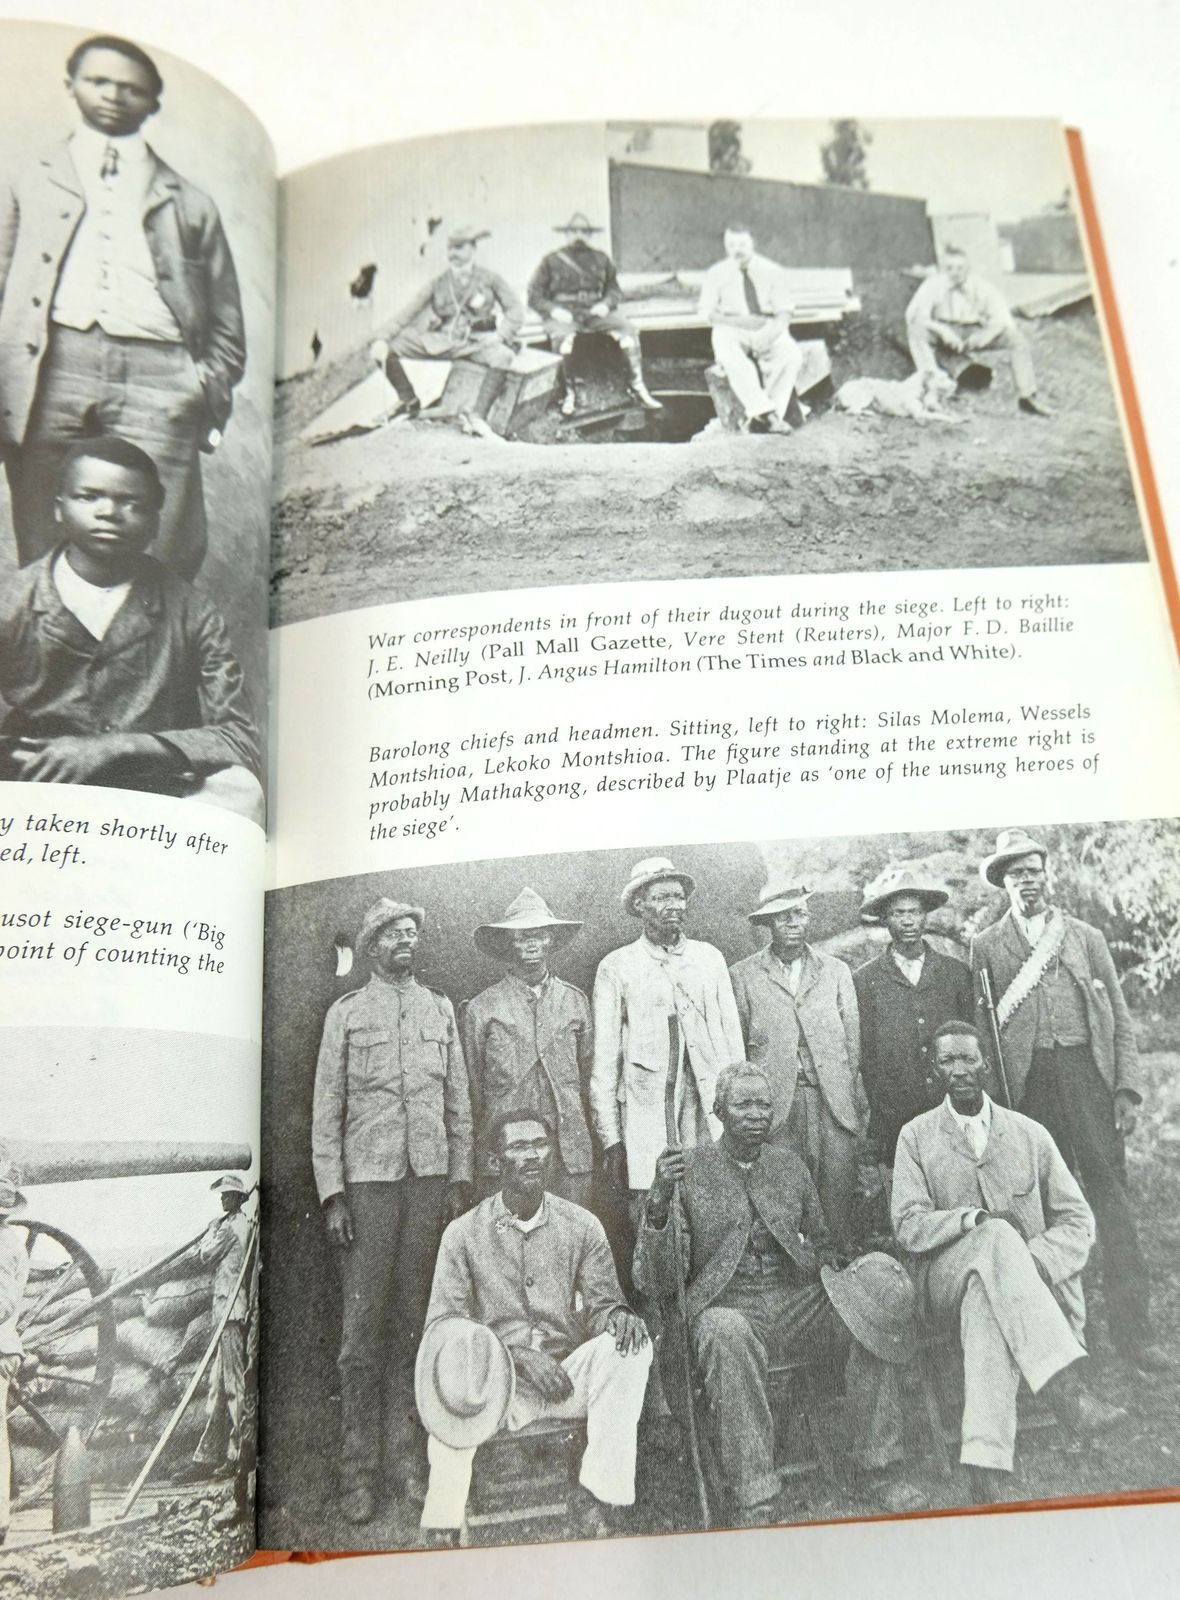 Photo of MAFEKING DIARY: A BLACK MAN'S VIEW OF A WHITE MAN'S WAR written by Plaatje, Sol T.
Comaroff, John L. published by Southern Book Publishers (STOCK CODE: 1819553)  for sale by Stella & Rose's Books